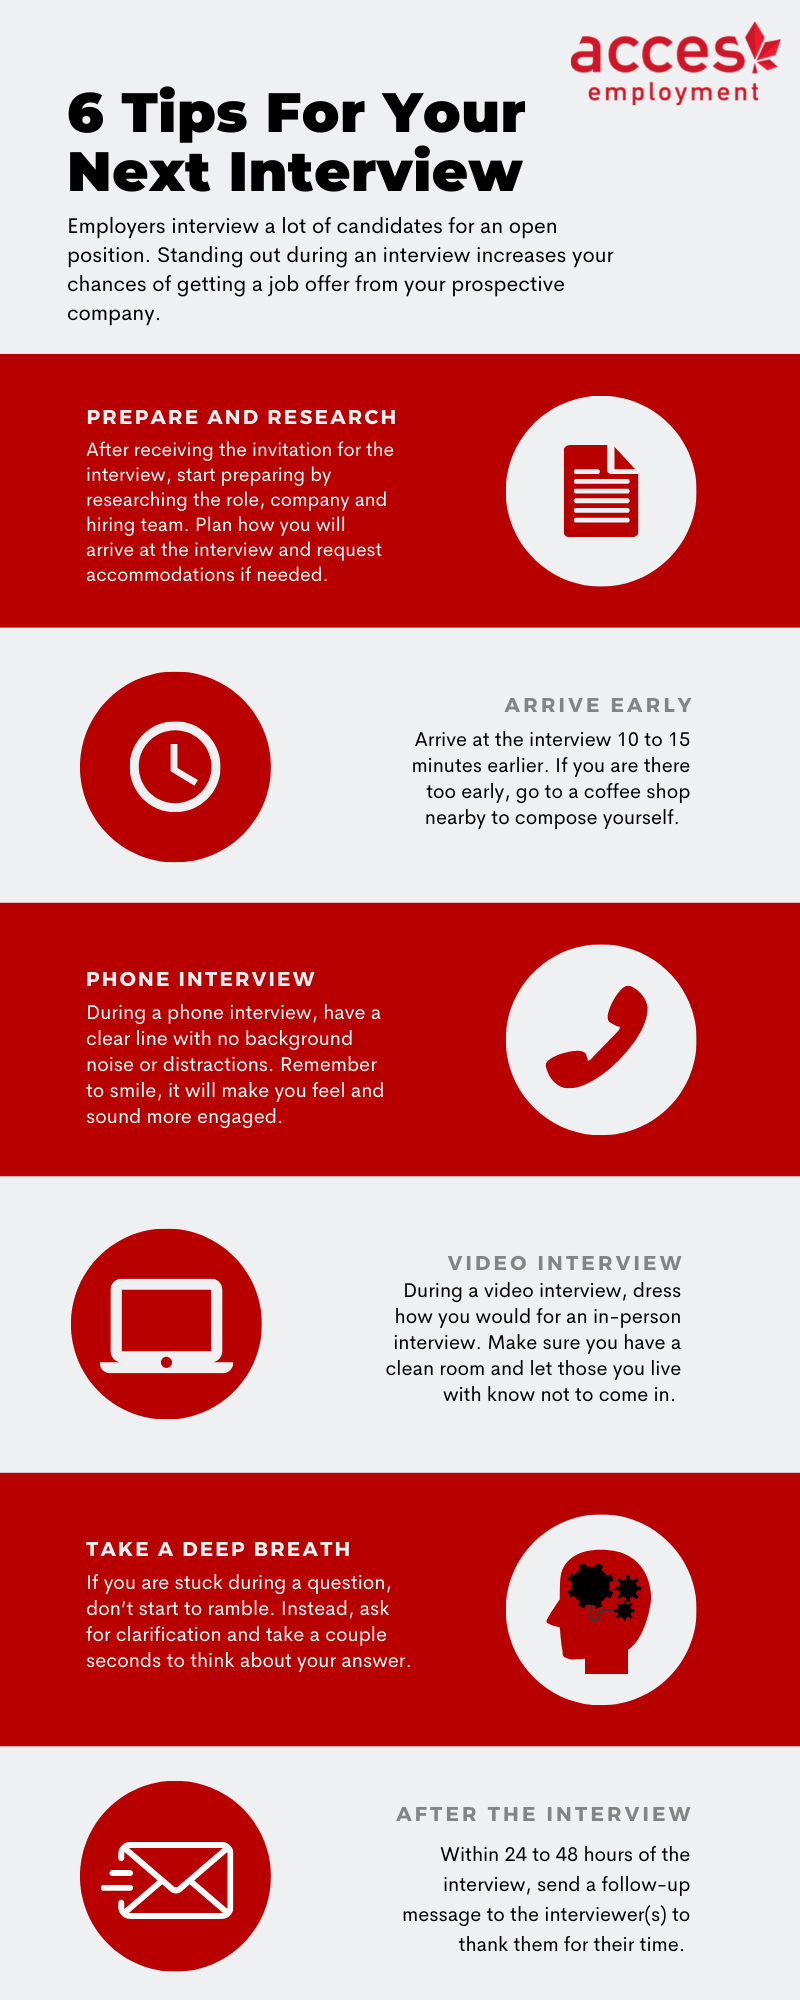 6 tips for your next interview